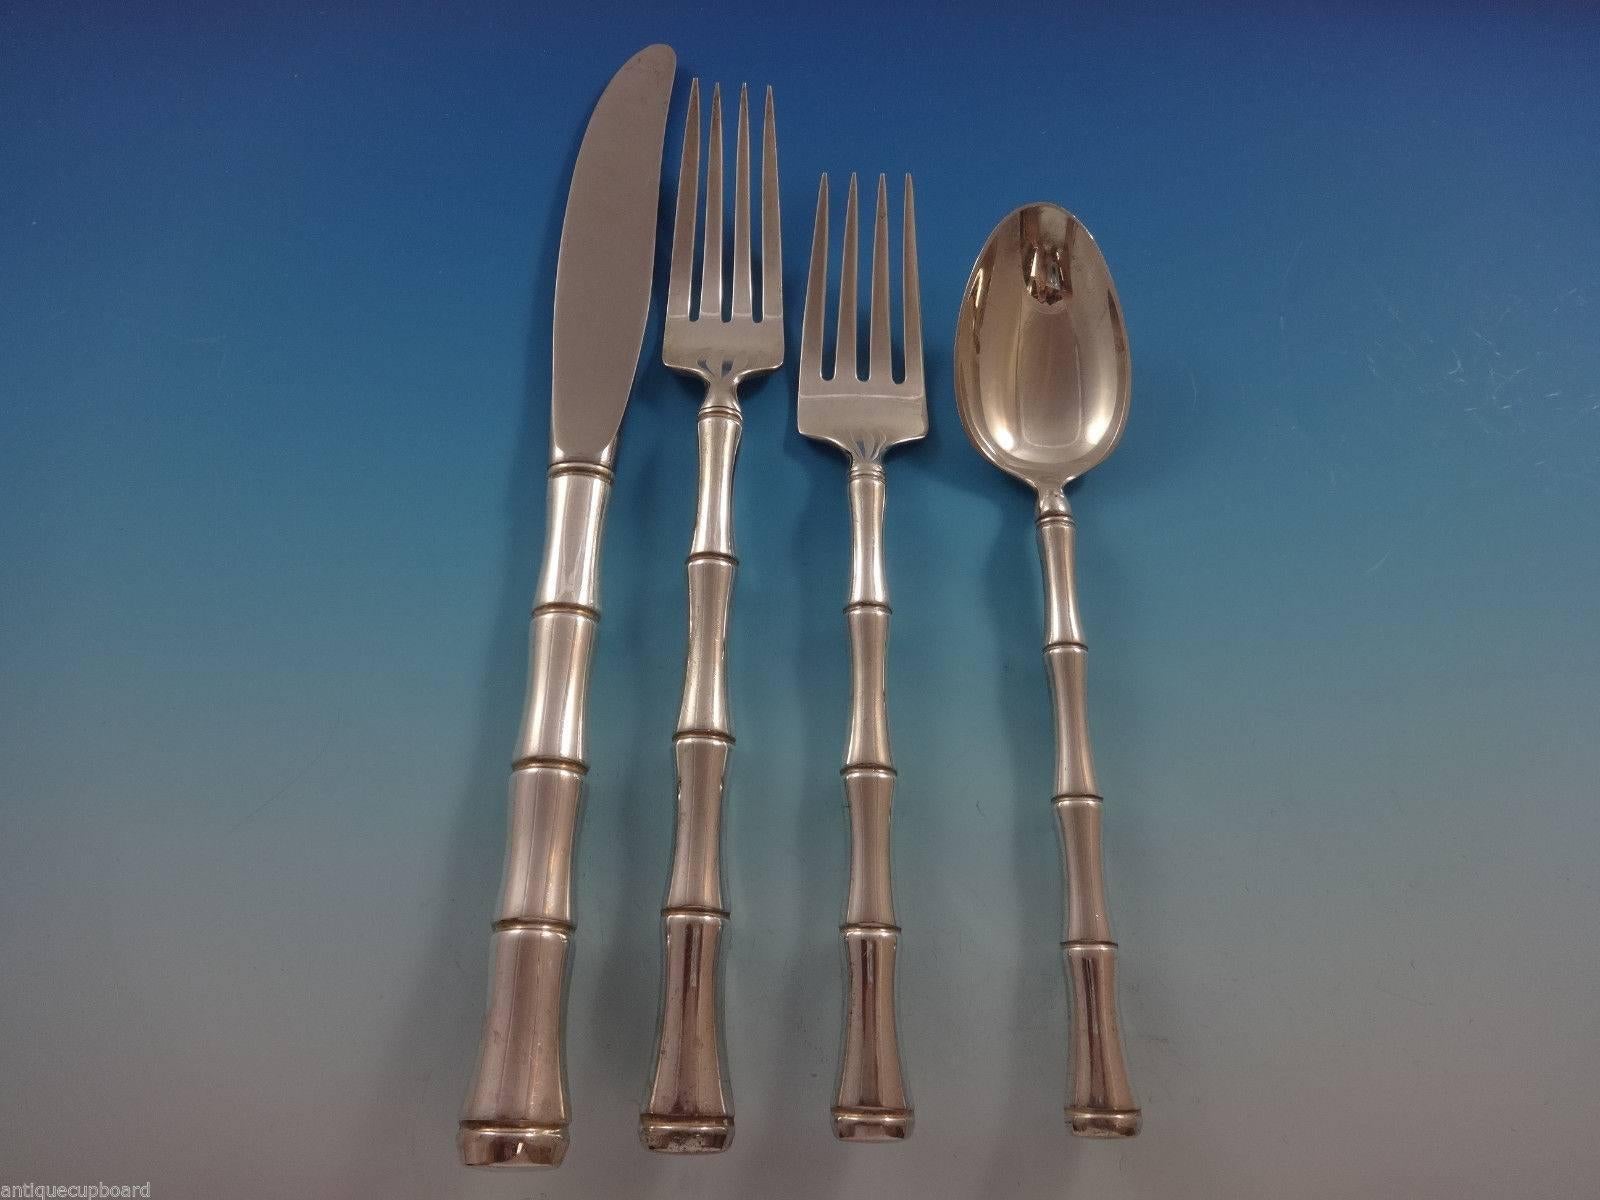 Mandarin by Towle sterling silver flatware set of 34 pieces. This pattern features a fabulous 3-D hollow handle in the shape of a bamboo stalk. Its simplicity and character have made it a favorite for modern table settings, but the thematic